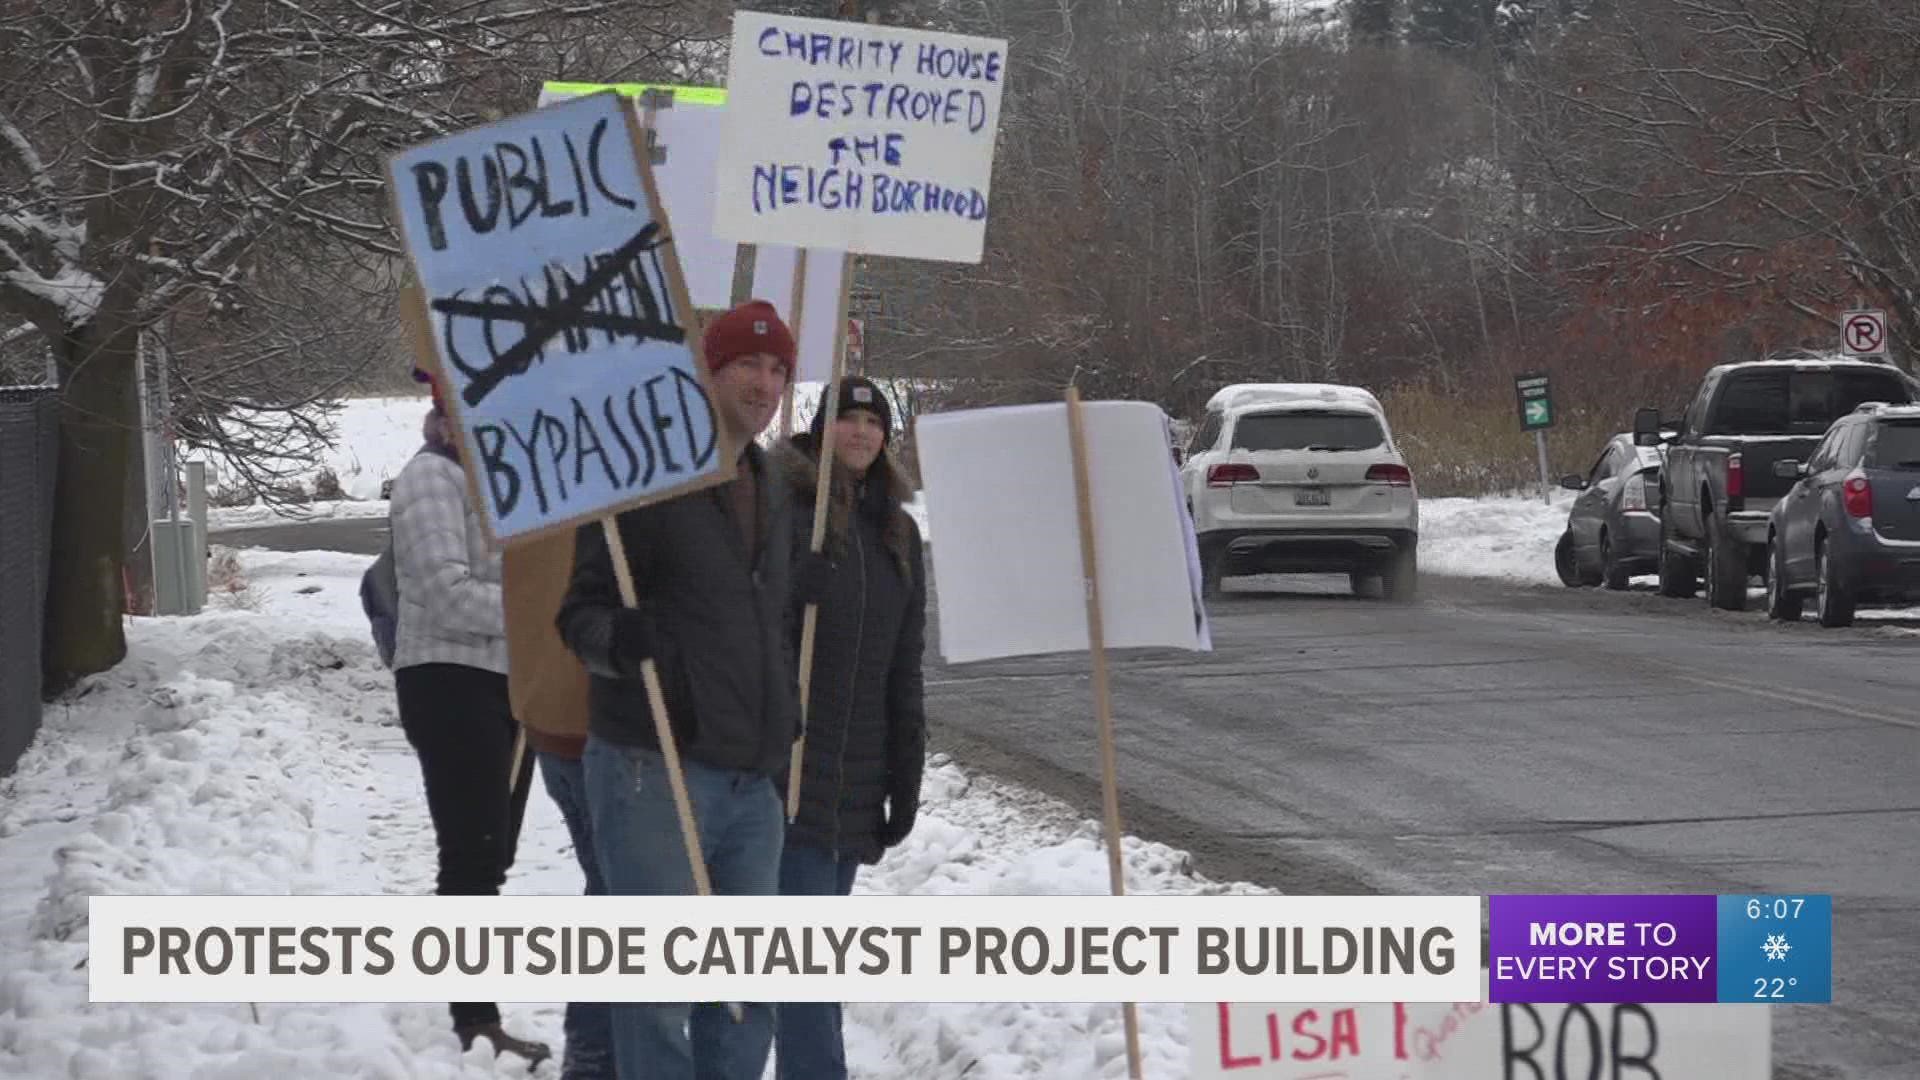 Even though the Catalyst project is looking to move people by the end of the week, West Hills protesters said their effort to protect their neighborhood isn't over.